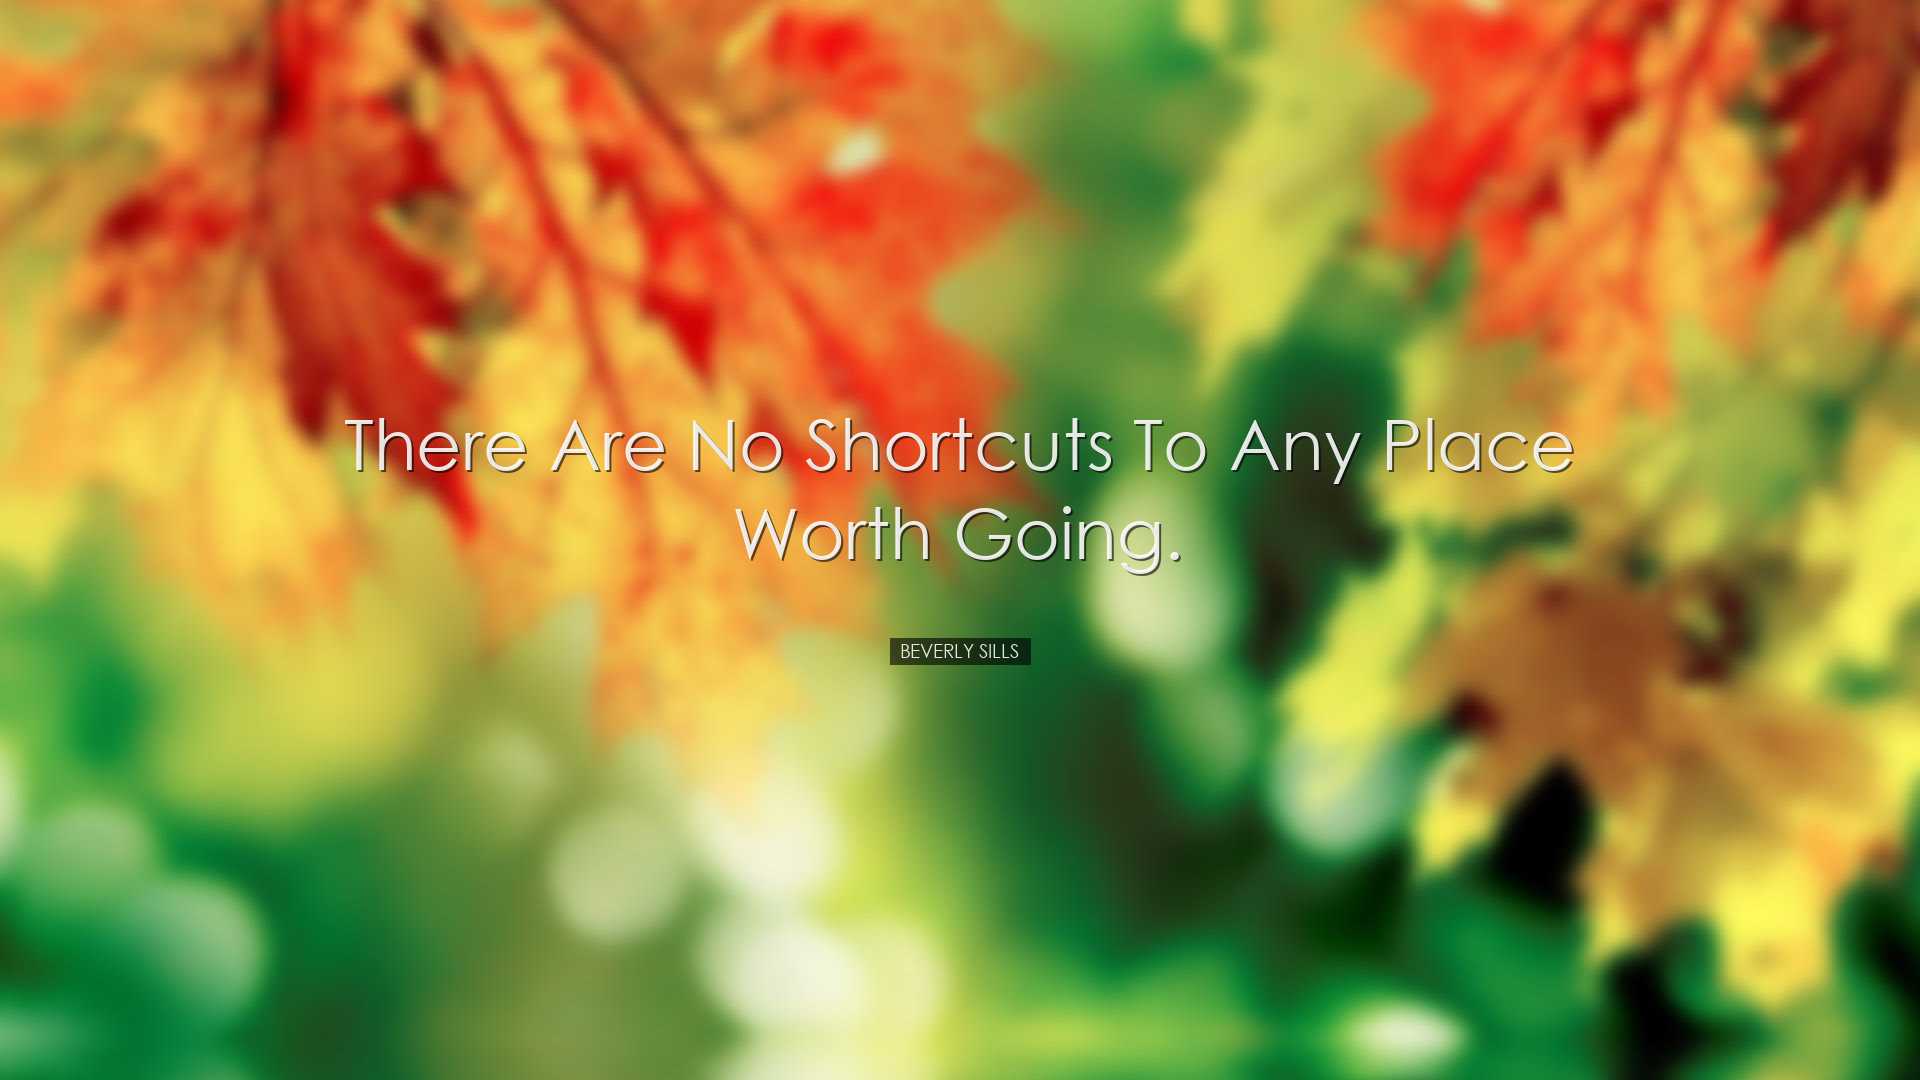 There are no shortcuts to any place worth going. - Beverly Sills